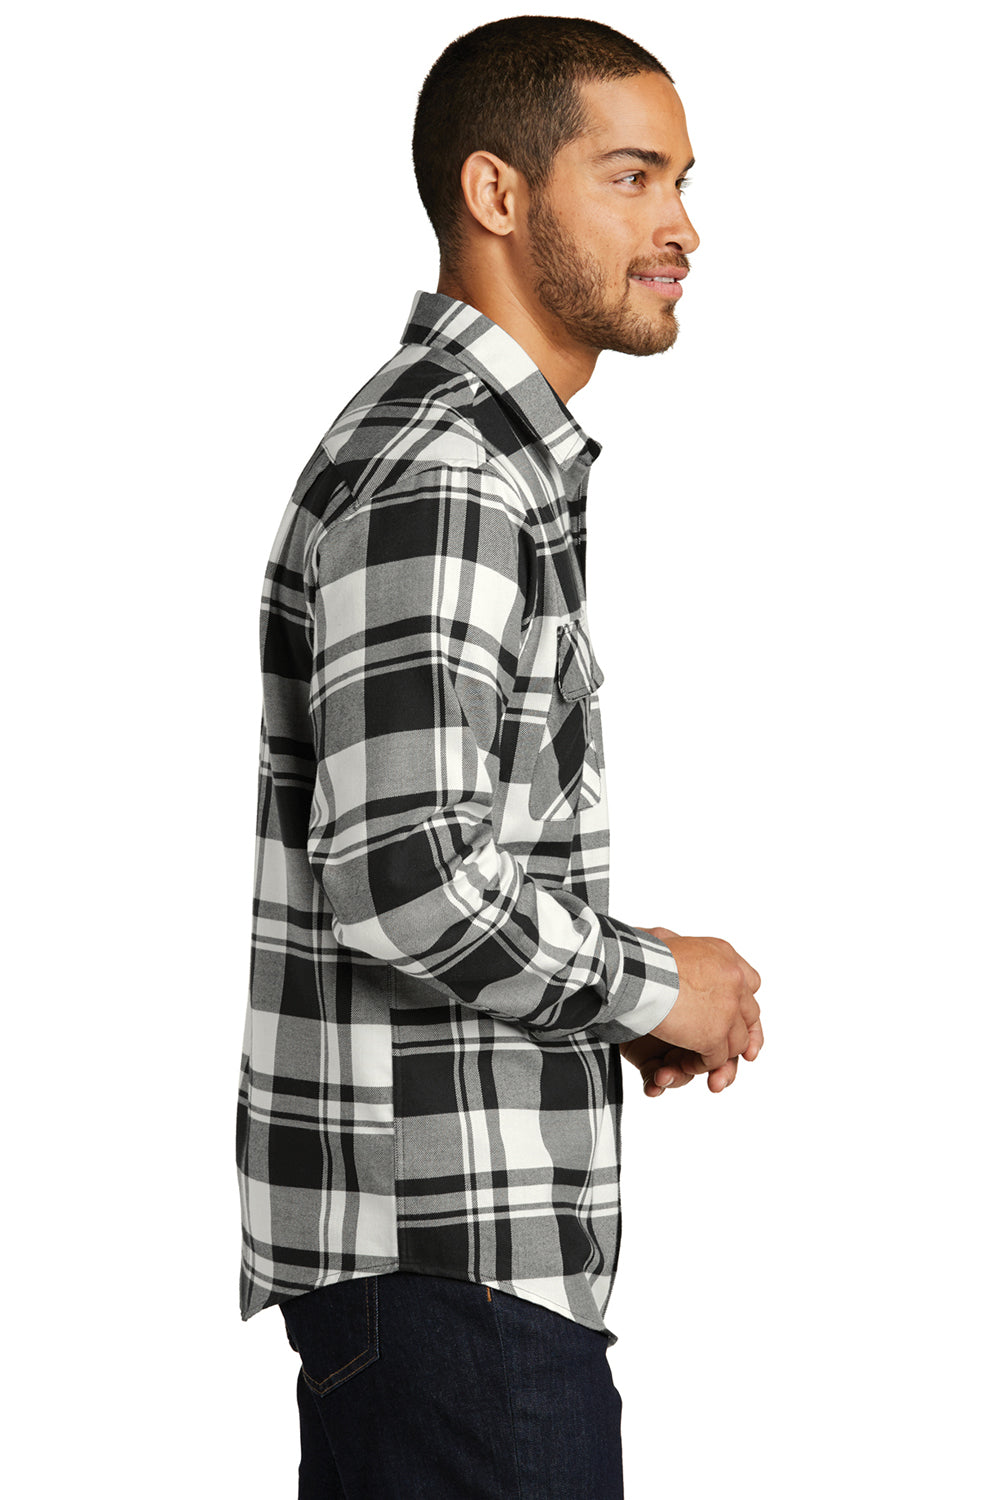 Port Authority W668 Mens Flannel Long Sleeve Button Down Shirt w/ Double Pockets White/Black Side